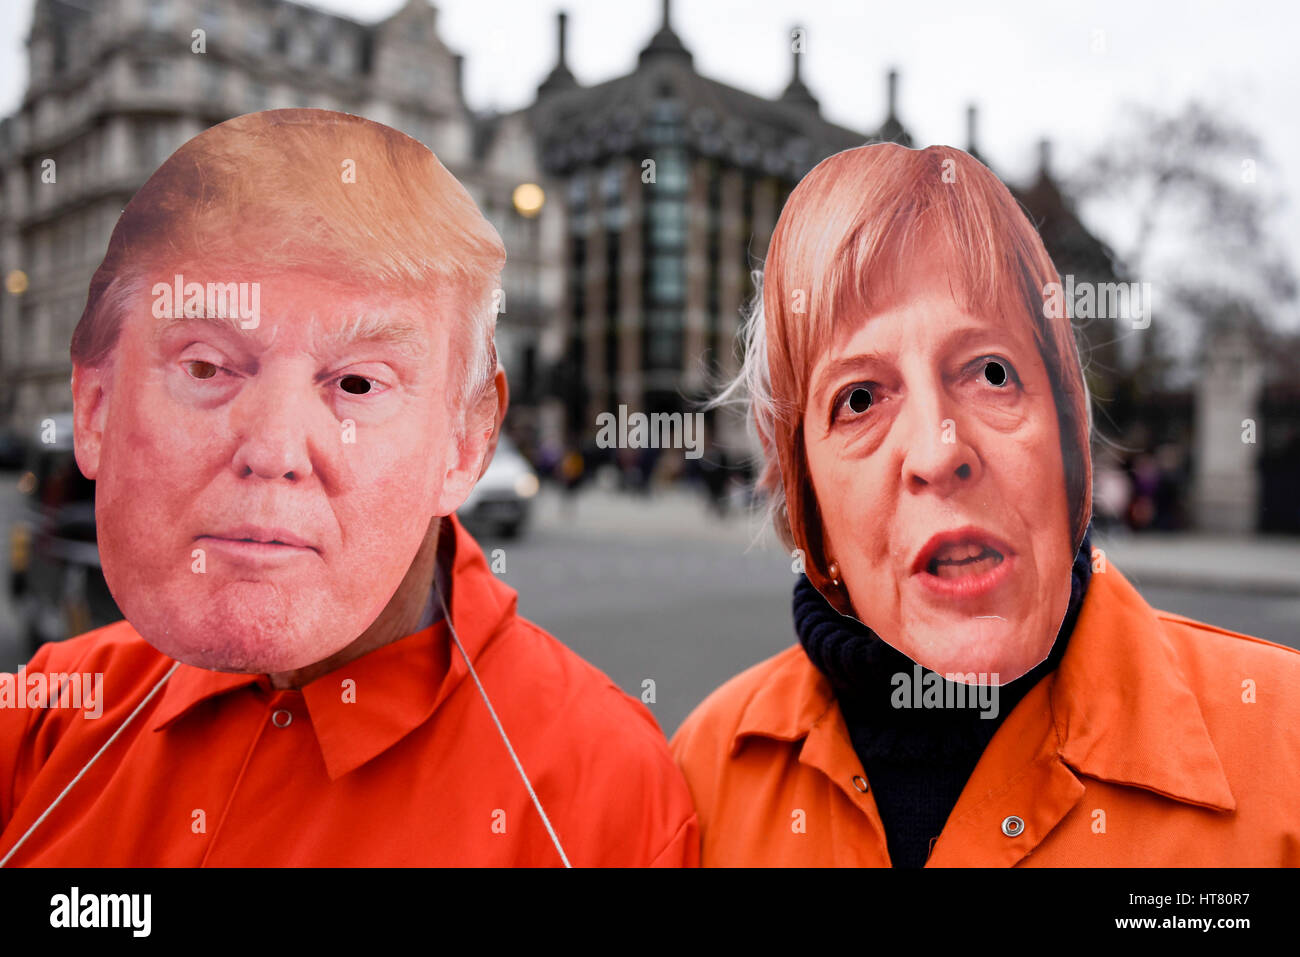 London, UK.  8 March 2017.  Members of Guantanamo Justice Campaign, wearing Donald Trump and Theresa May masks, take part in a protest in Parliament Square opposite the Houses of Parliament demanding that Donald Trump, President of the United States, close Guantanamo Bay concentration camp and calling on Theresa May, Prime Minister, to seek representations from President Trump that it will be a closure, not a relocation to a mainland US prison.  Credit: Stephen Chung / Alamy Live News Stock Photo